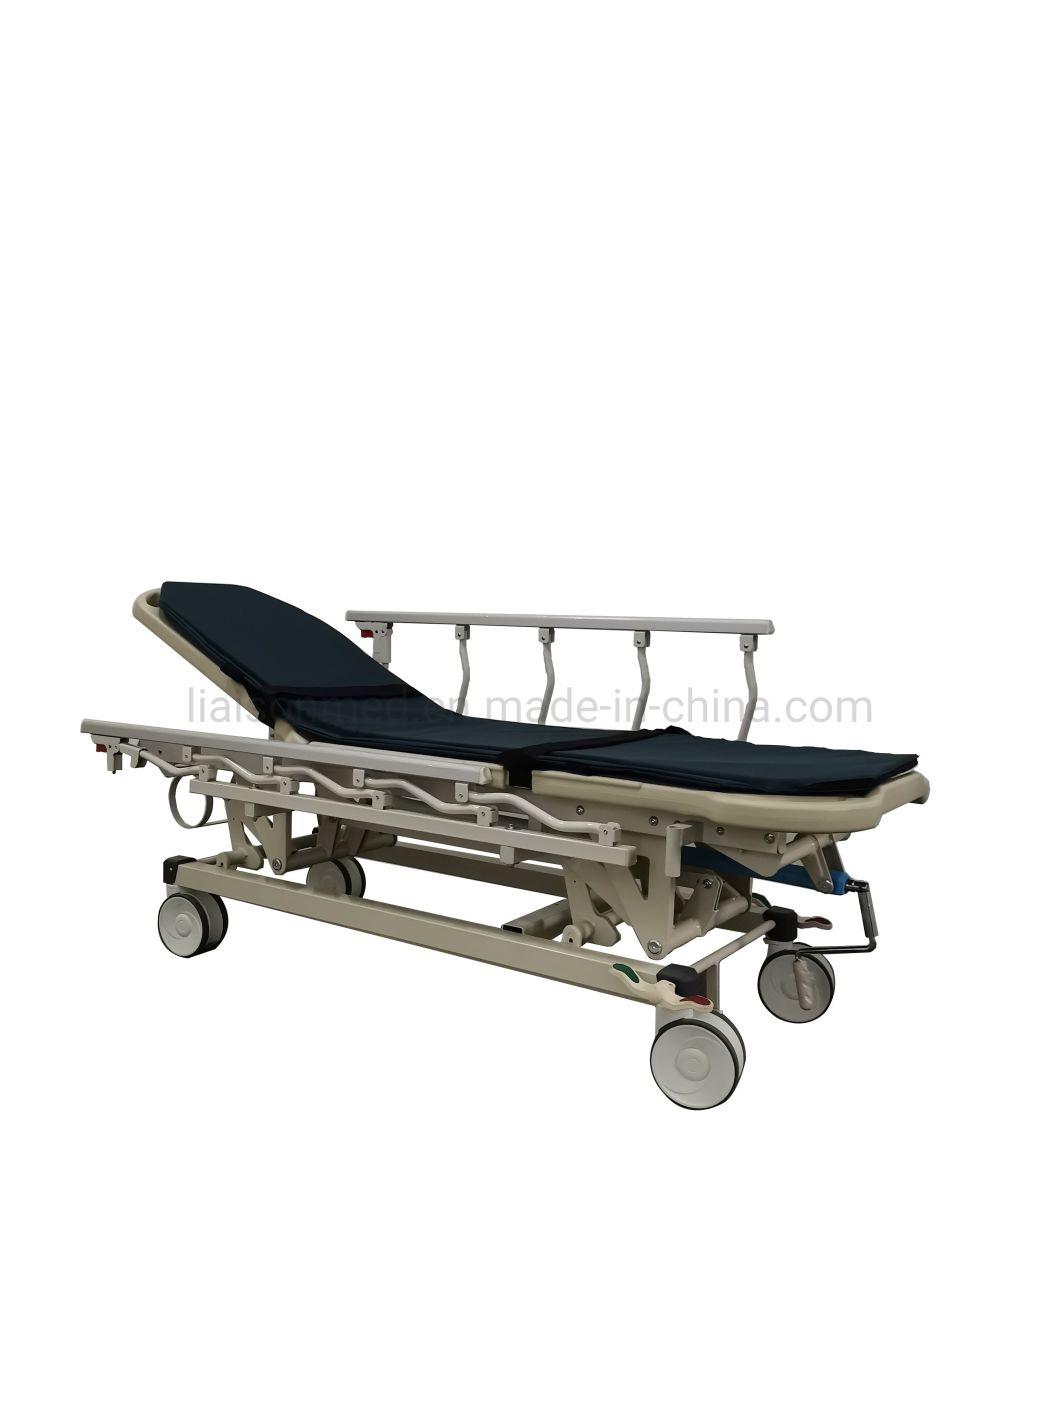 Mn-SD006 Medical Equipment Patient Use Emergency Bed Hospital Stretcher